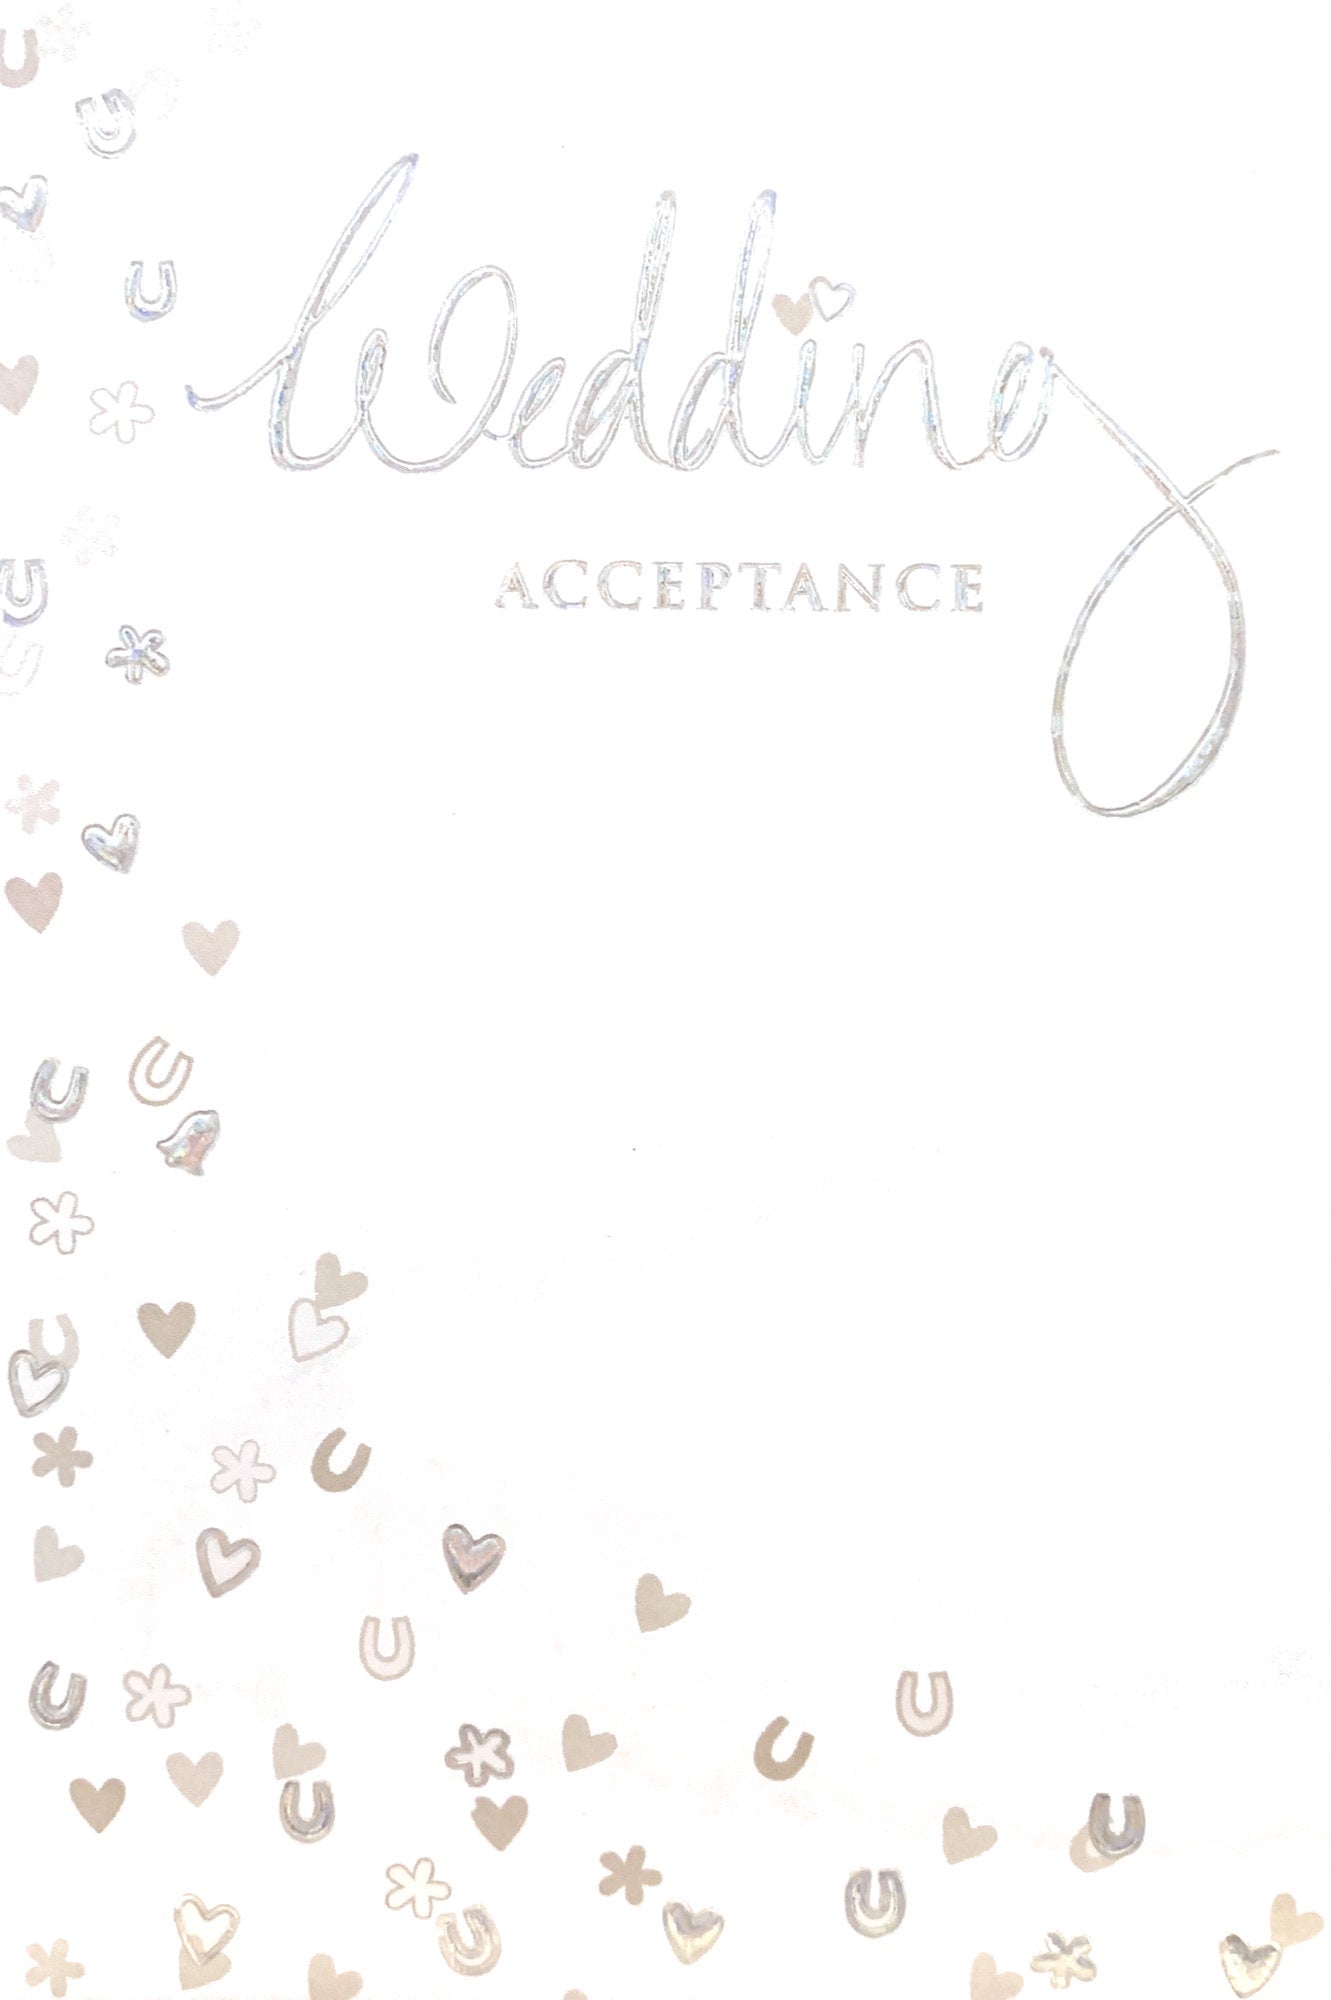 Front of Wedding Acceptance Horseshoes Card